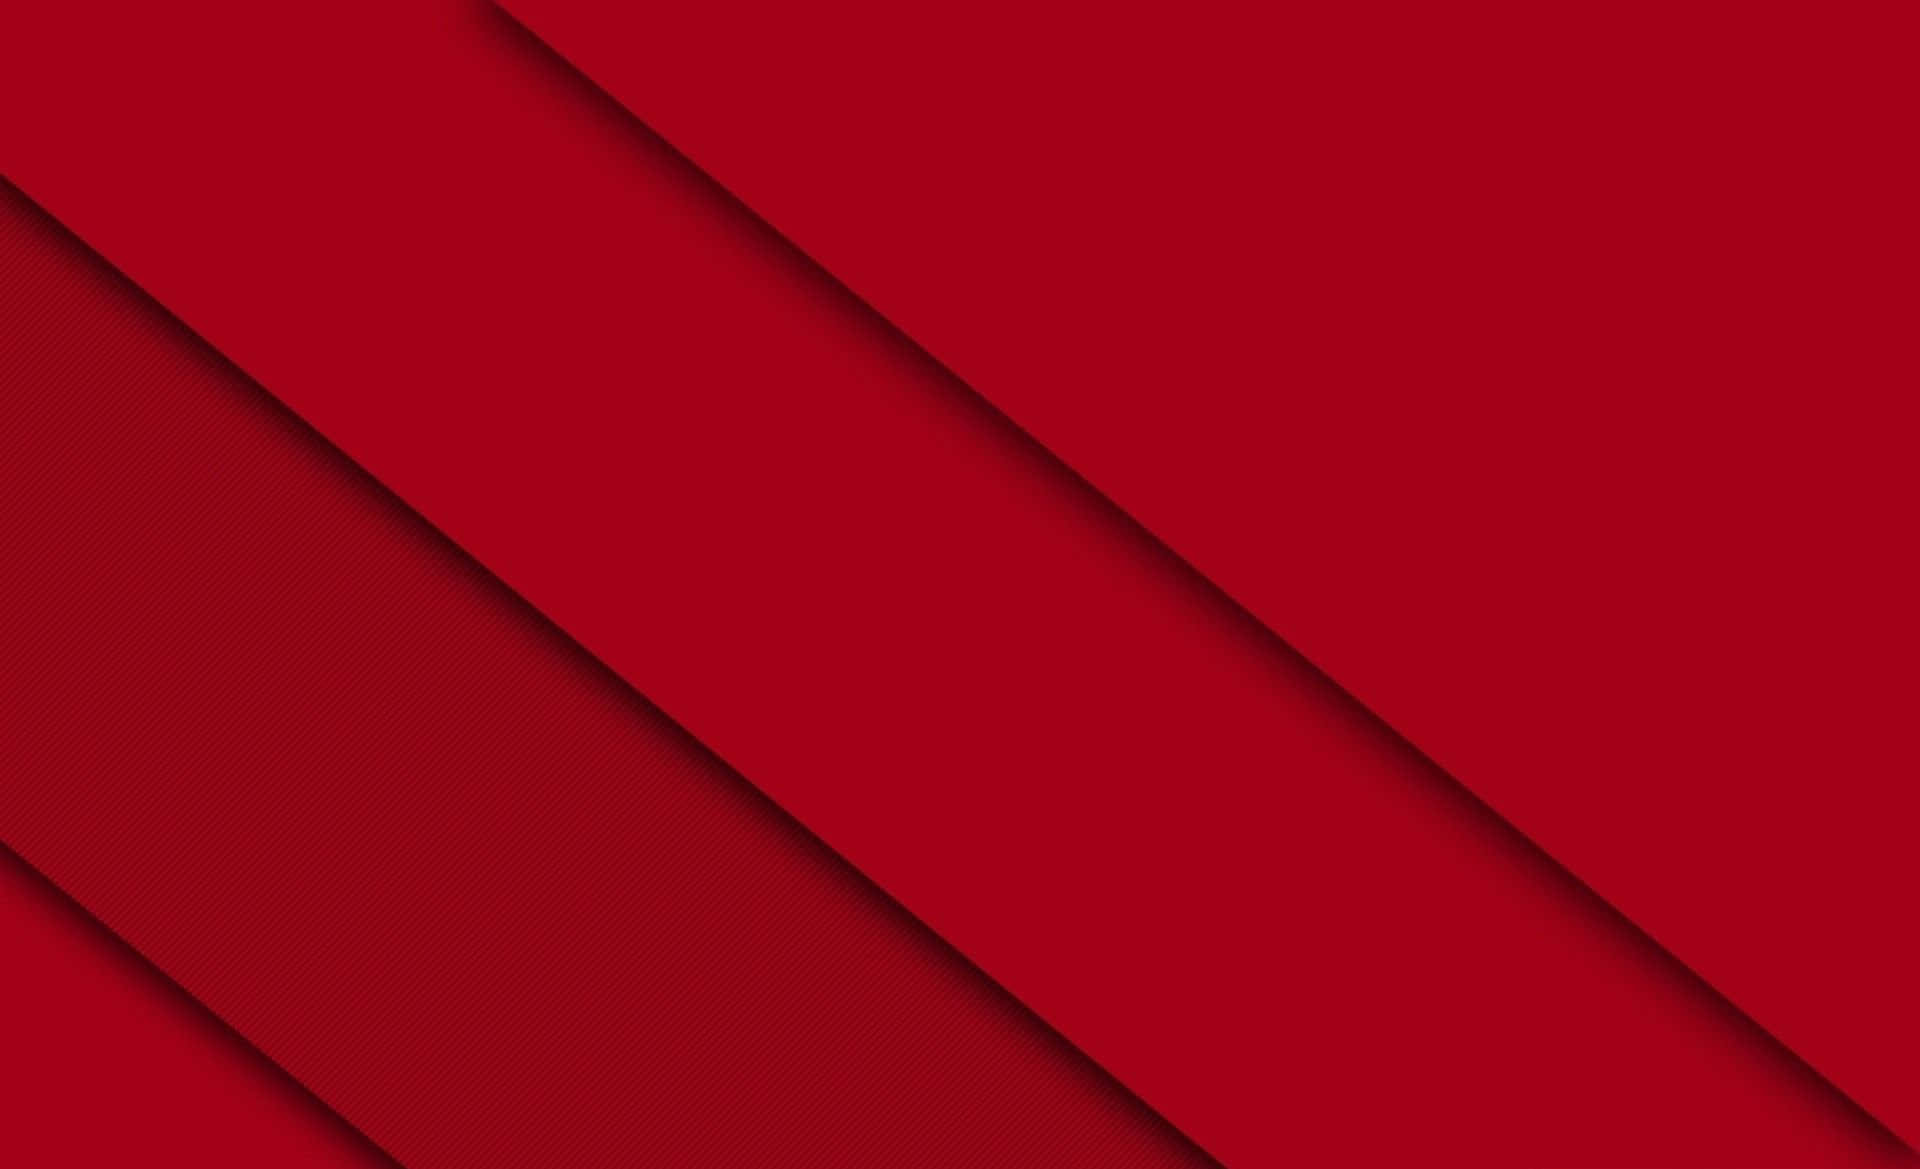 Brighten up your day with this metallic red background!